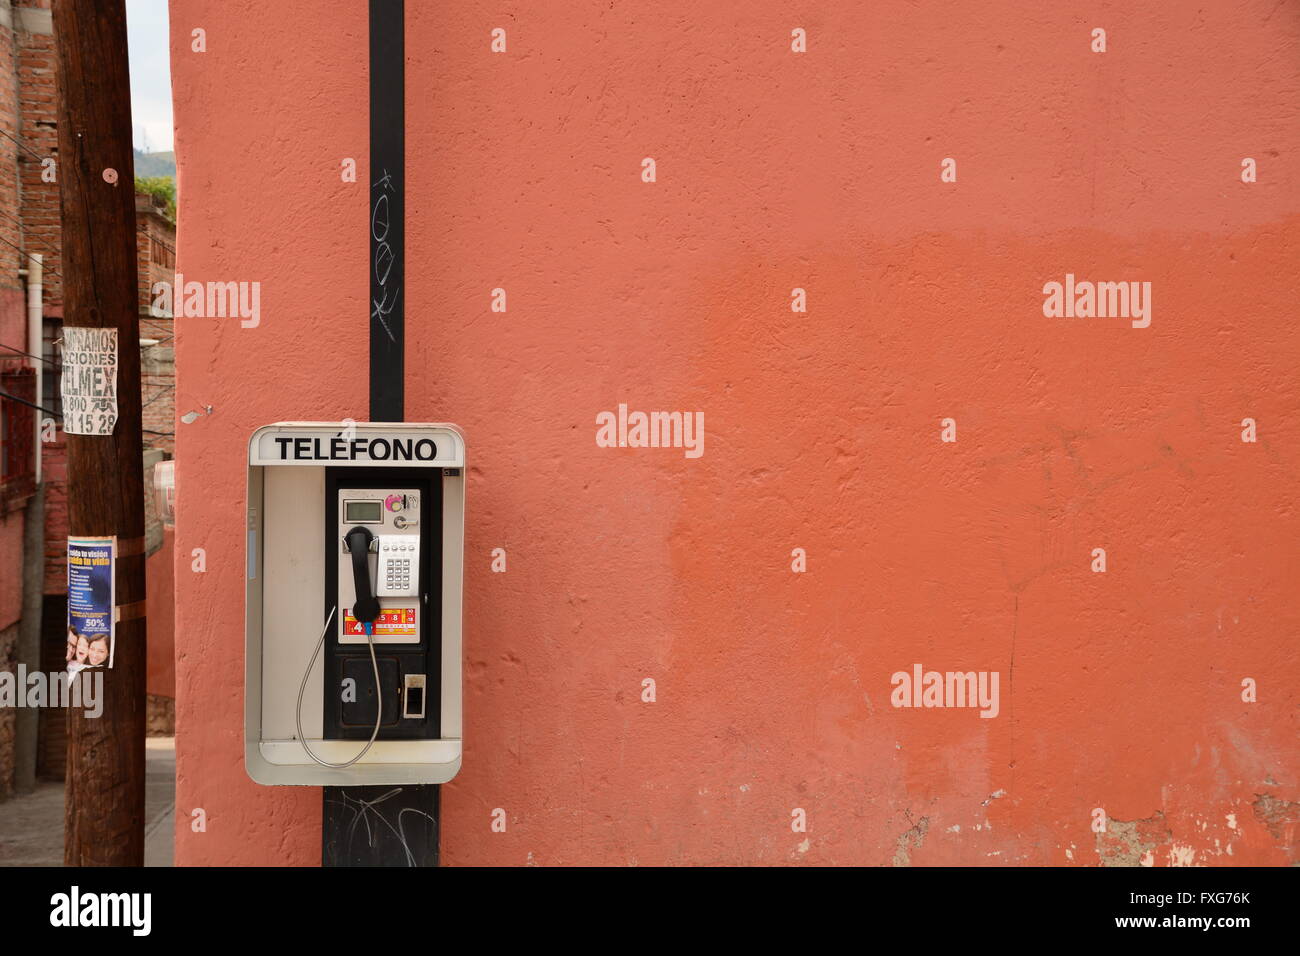 Red and orange painted street corner with a payphone, Spanish. Guanajuato, Mexico. Stock Photo